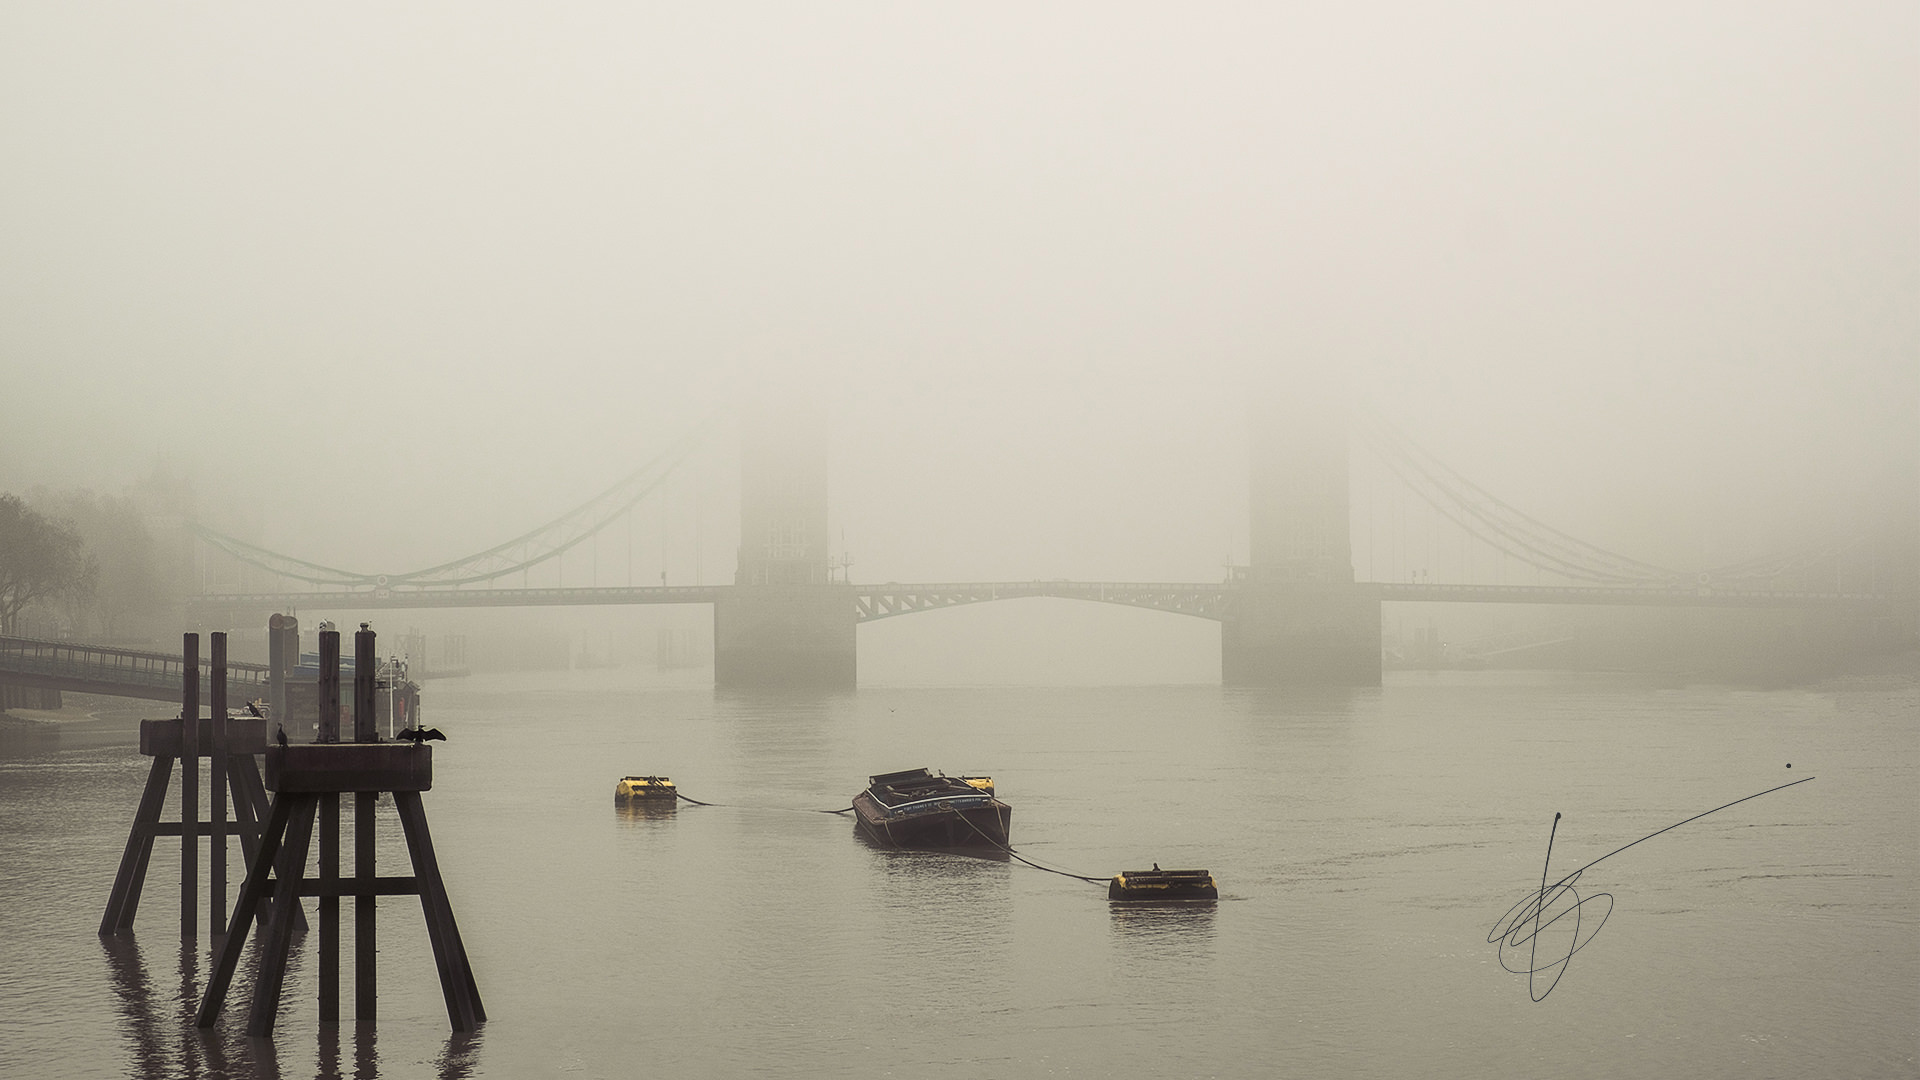 Tower Bridge in London almost invisible behind a thick fog layer